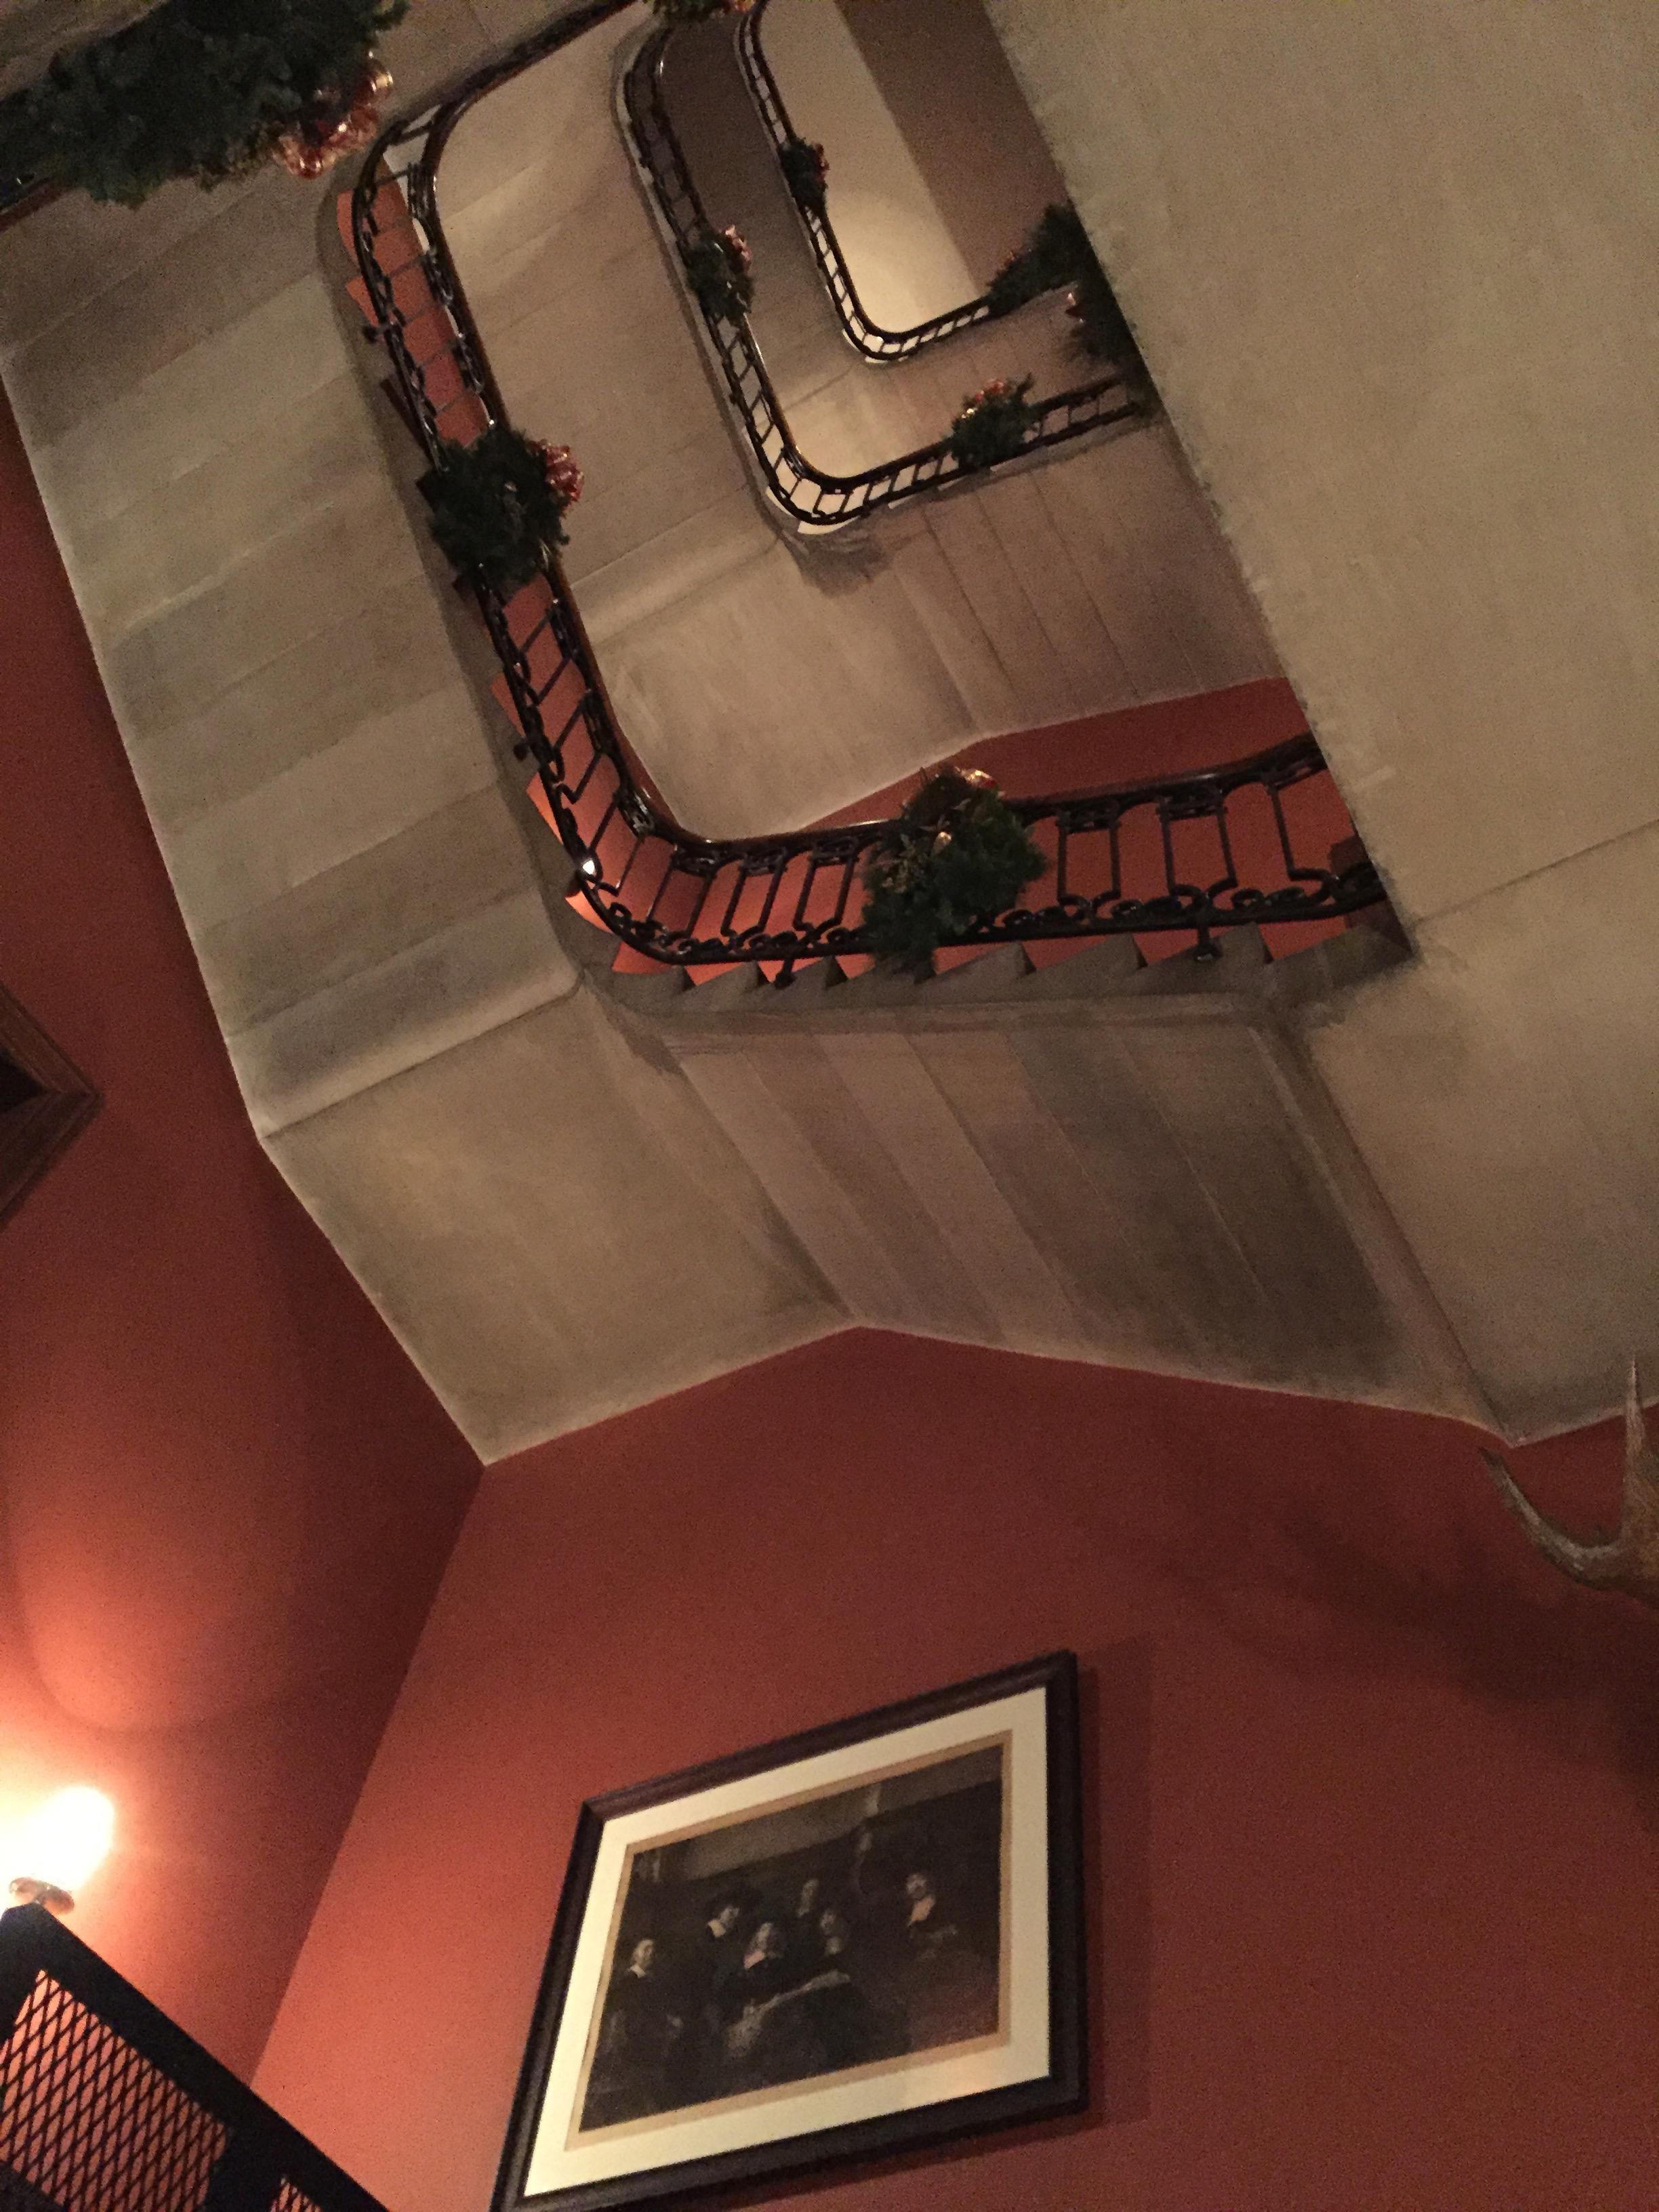 A very unique perspective on the staircase.